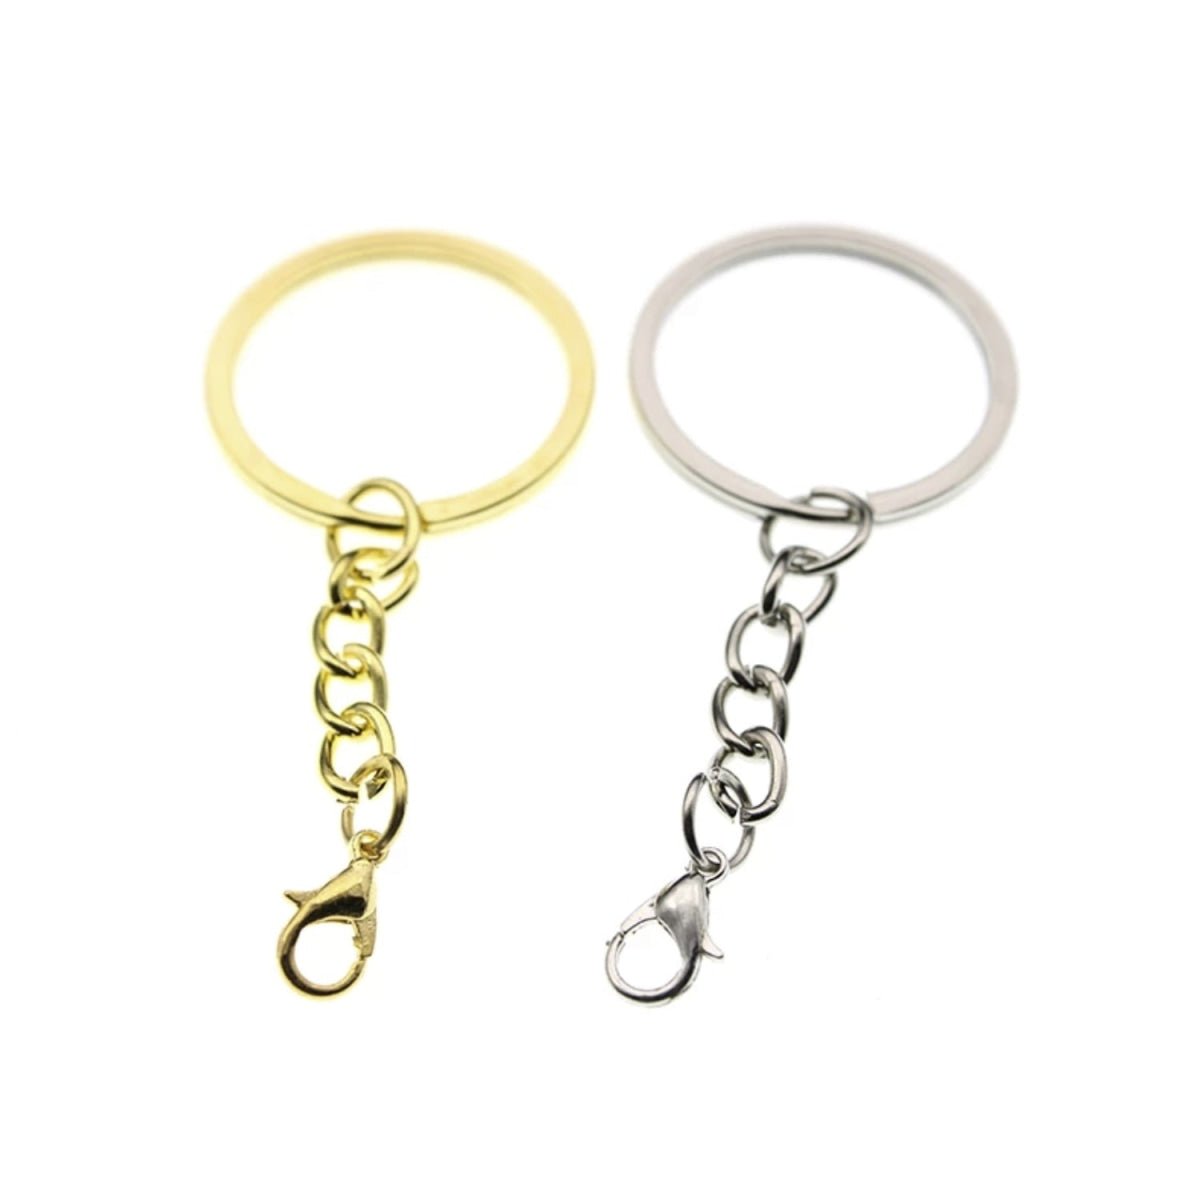 20pcs 30mm Gold or Rhodium Lobster Claw Hook Keyring Keychain Split Ring Chain Key Rings Key Chains - Gold - - Asia Sell